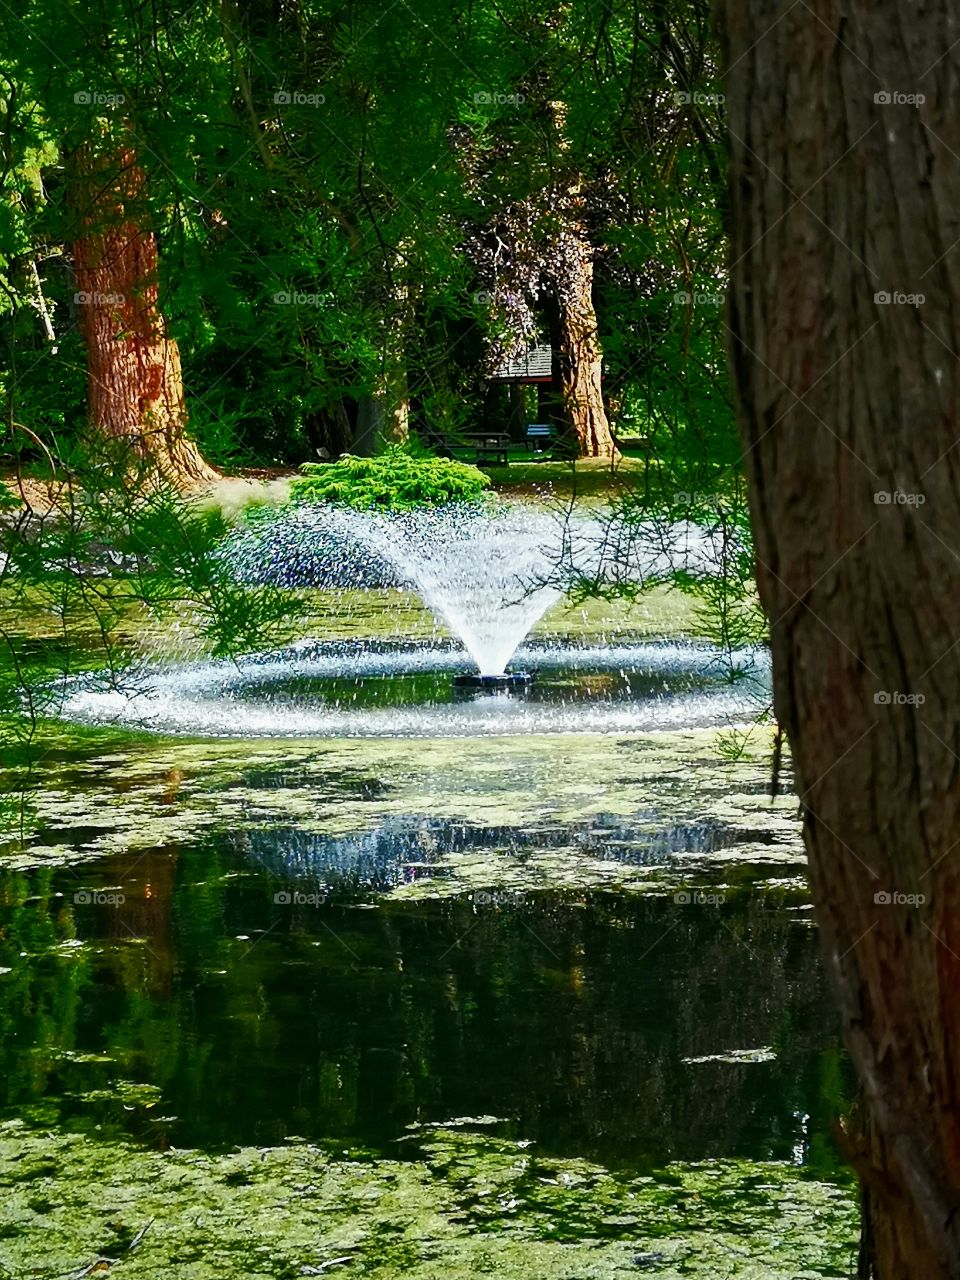 flora and fauna 2019, nature, green, trees, water,